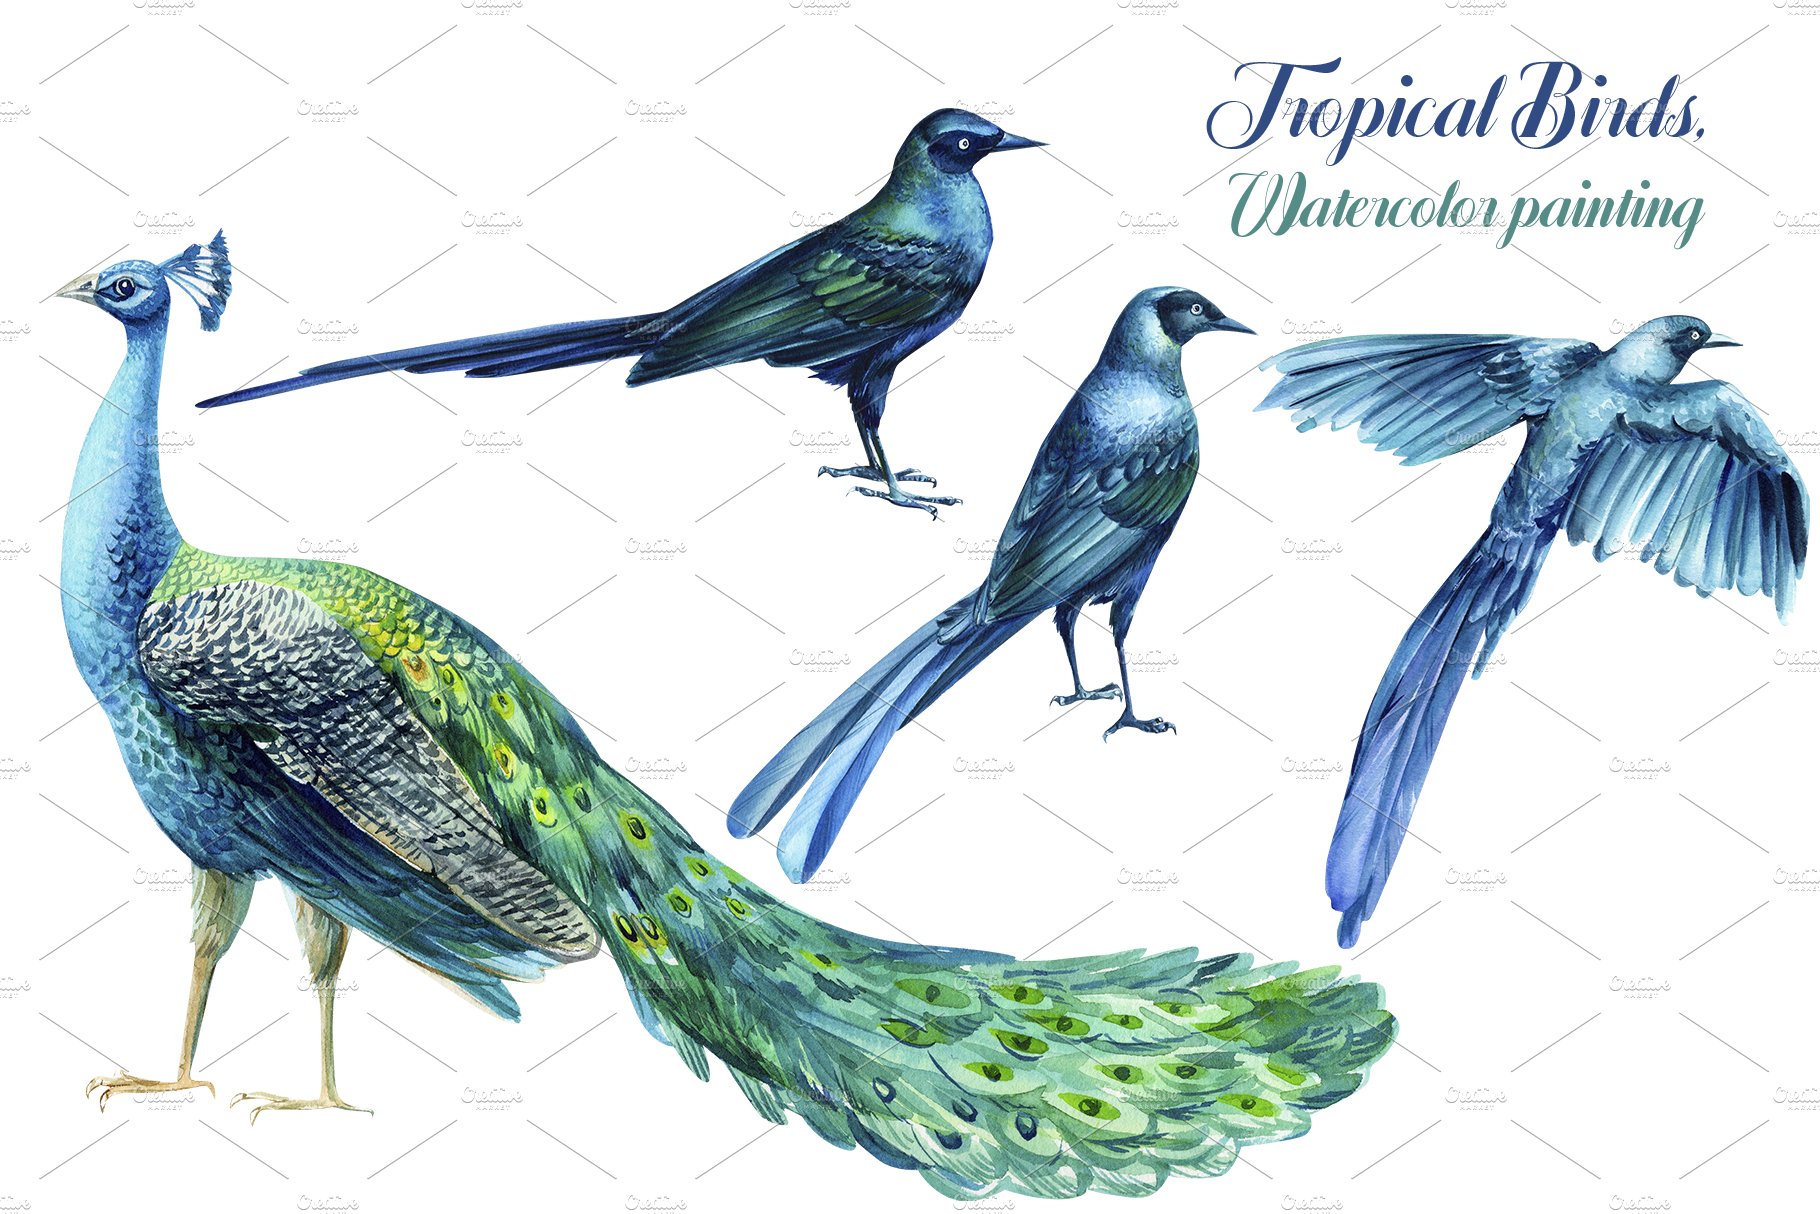 Tropical Birds, Watercolor painting preview image.